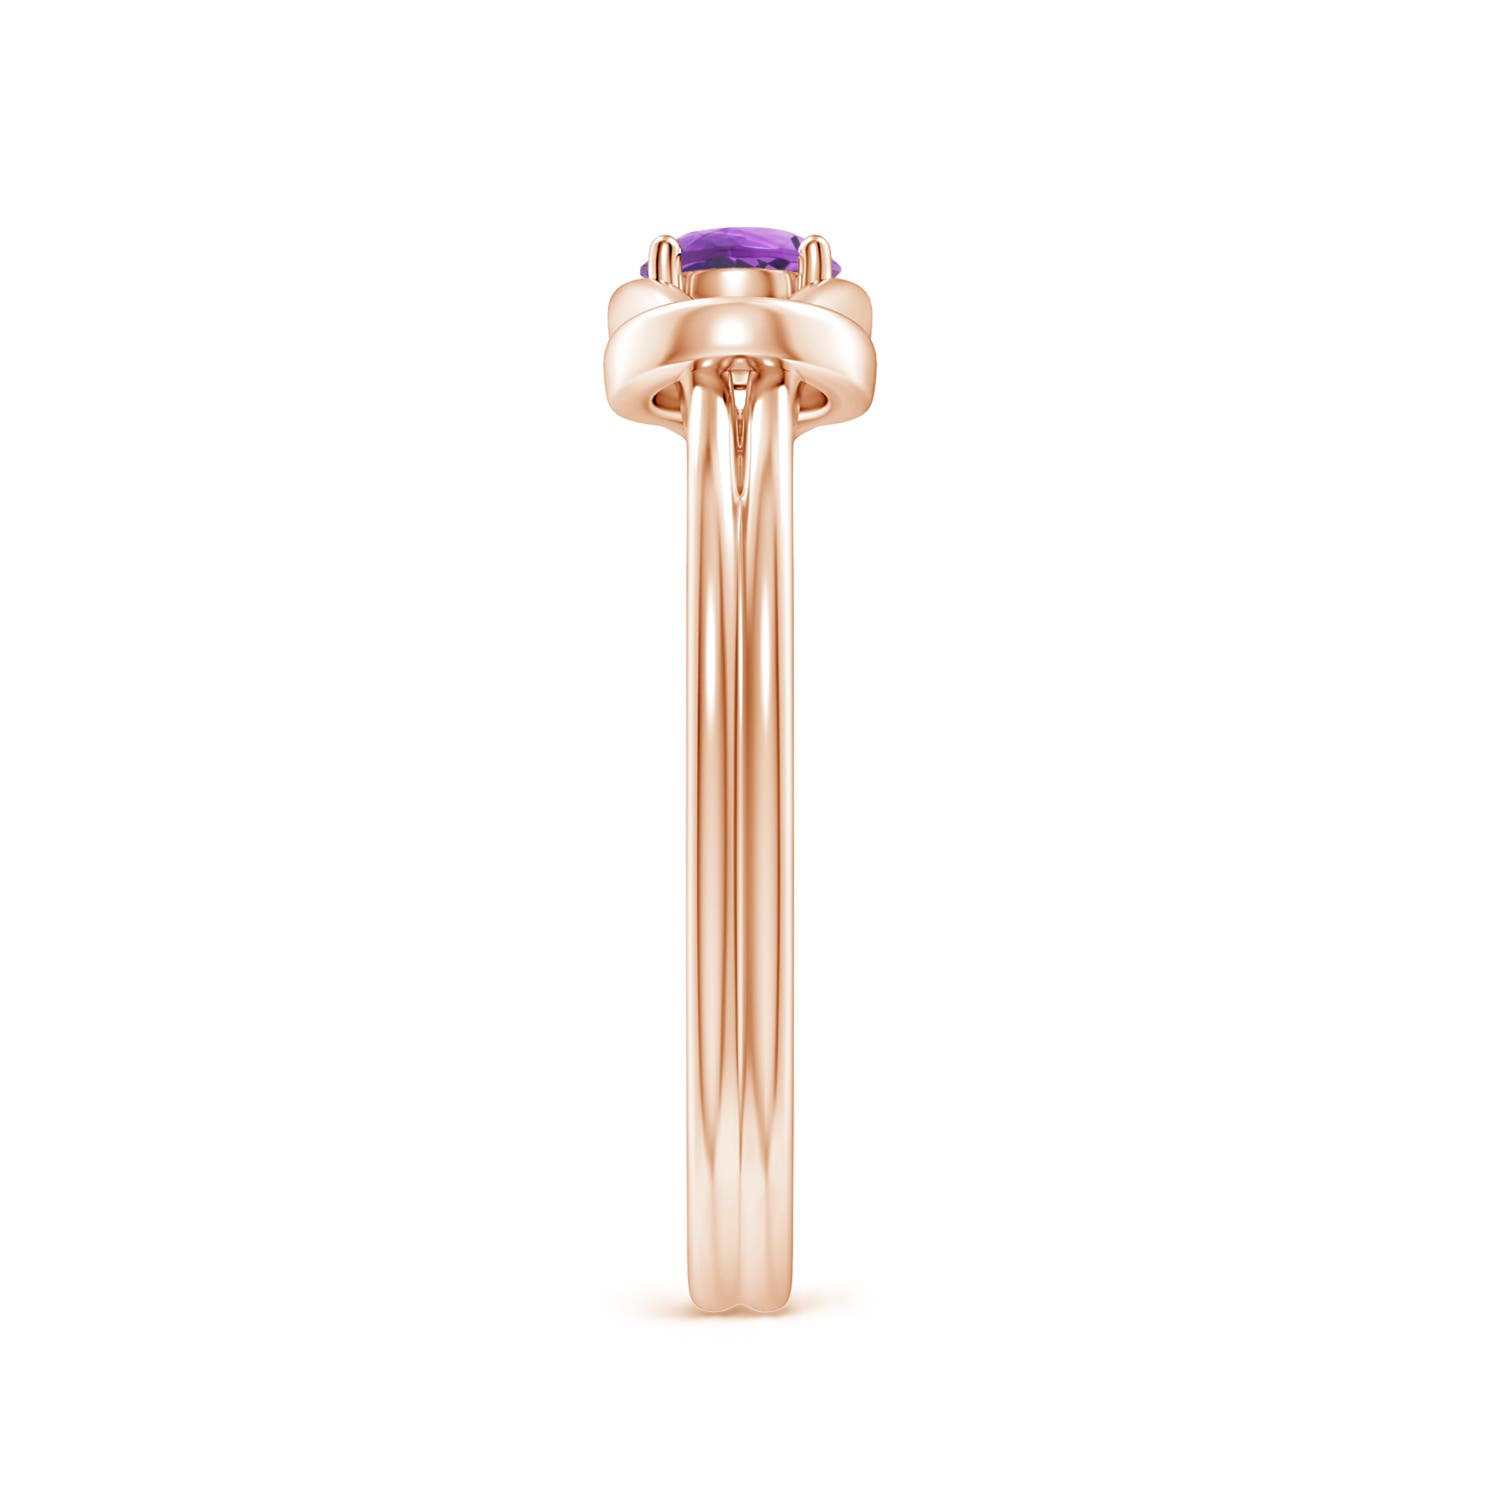 AA - Amethyst / 0.25 CT / 14 KT Rose Gold